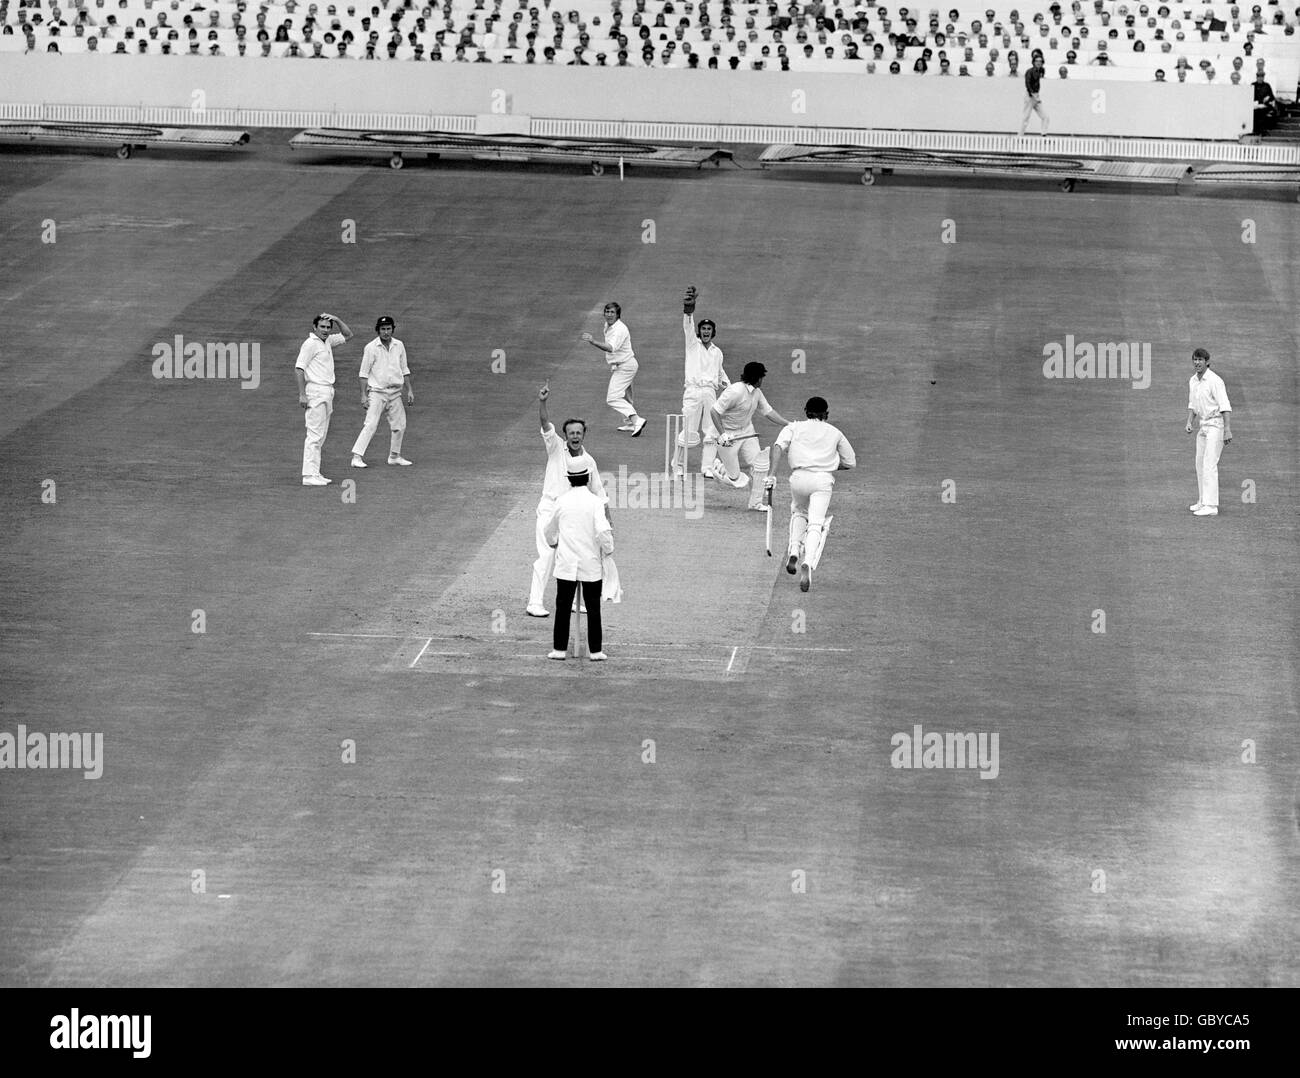 England's Derek Underwood (third l) and Alan Knott (fourth r) appeal for lbw against Australia's Keith Stackpole (third r), watched by teammates Ray Illingworth (l), Keith Fletcher (second l), Peter Parfitt (fourth l) and Brian Luckhurst (r) Stock Photo